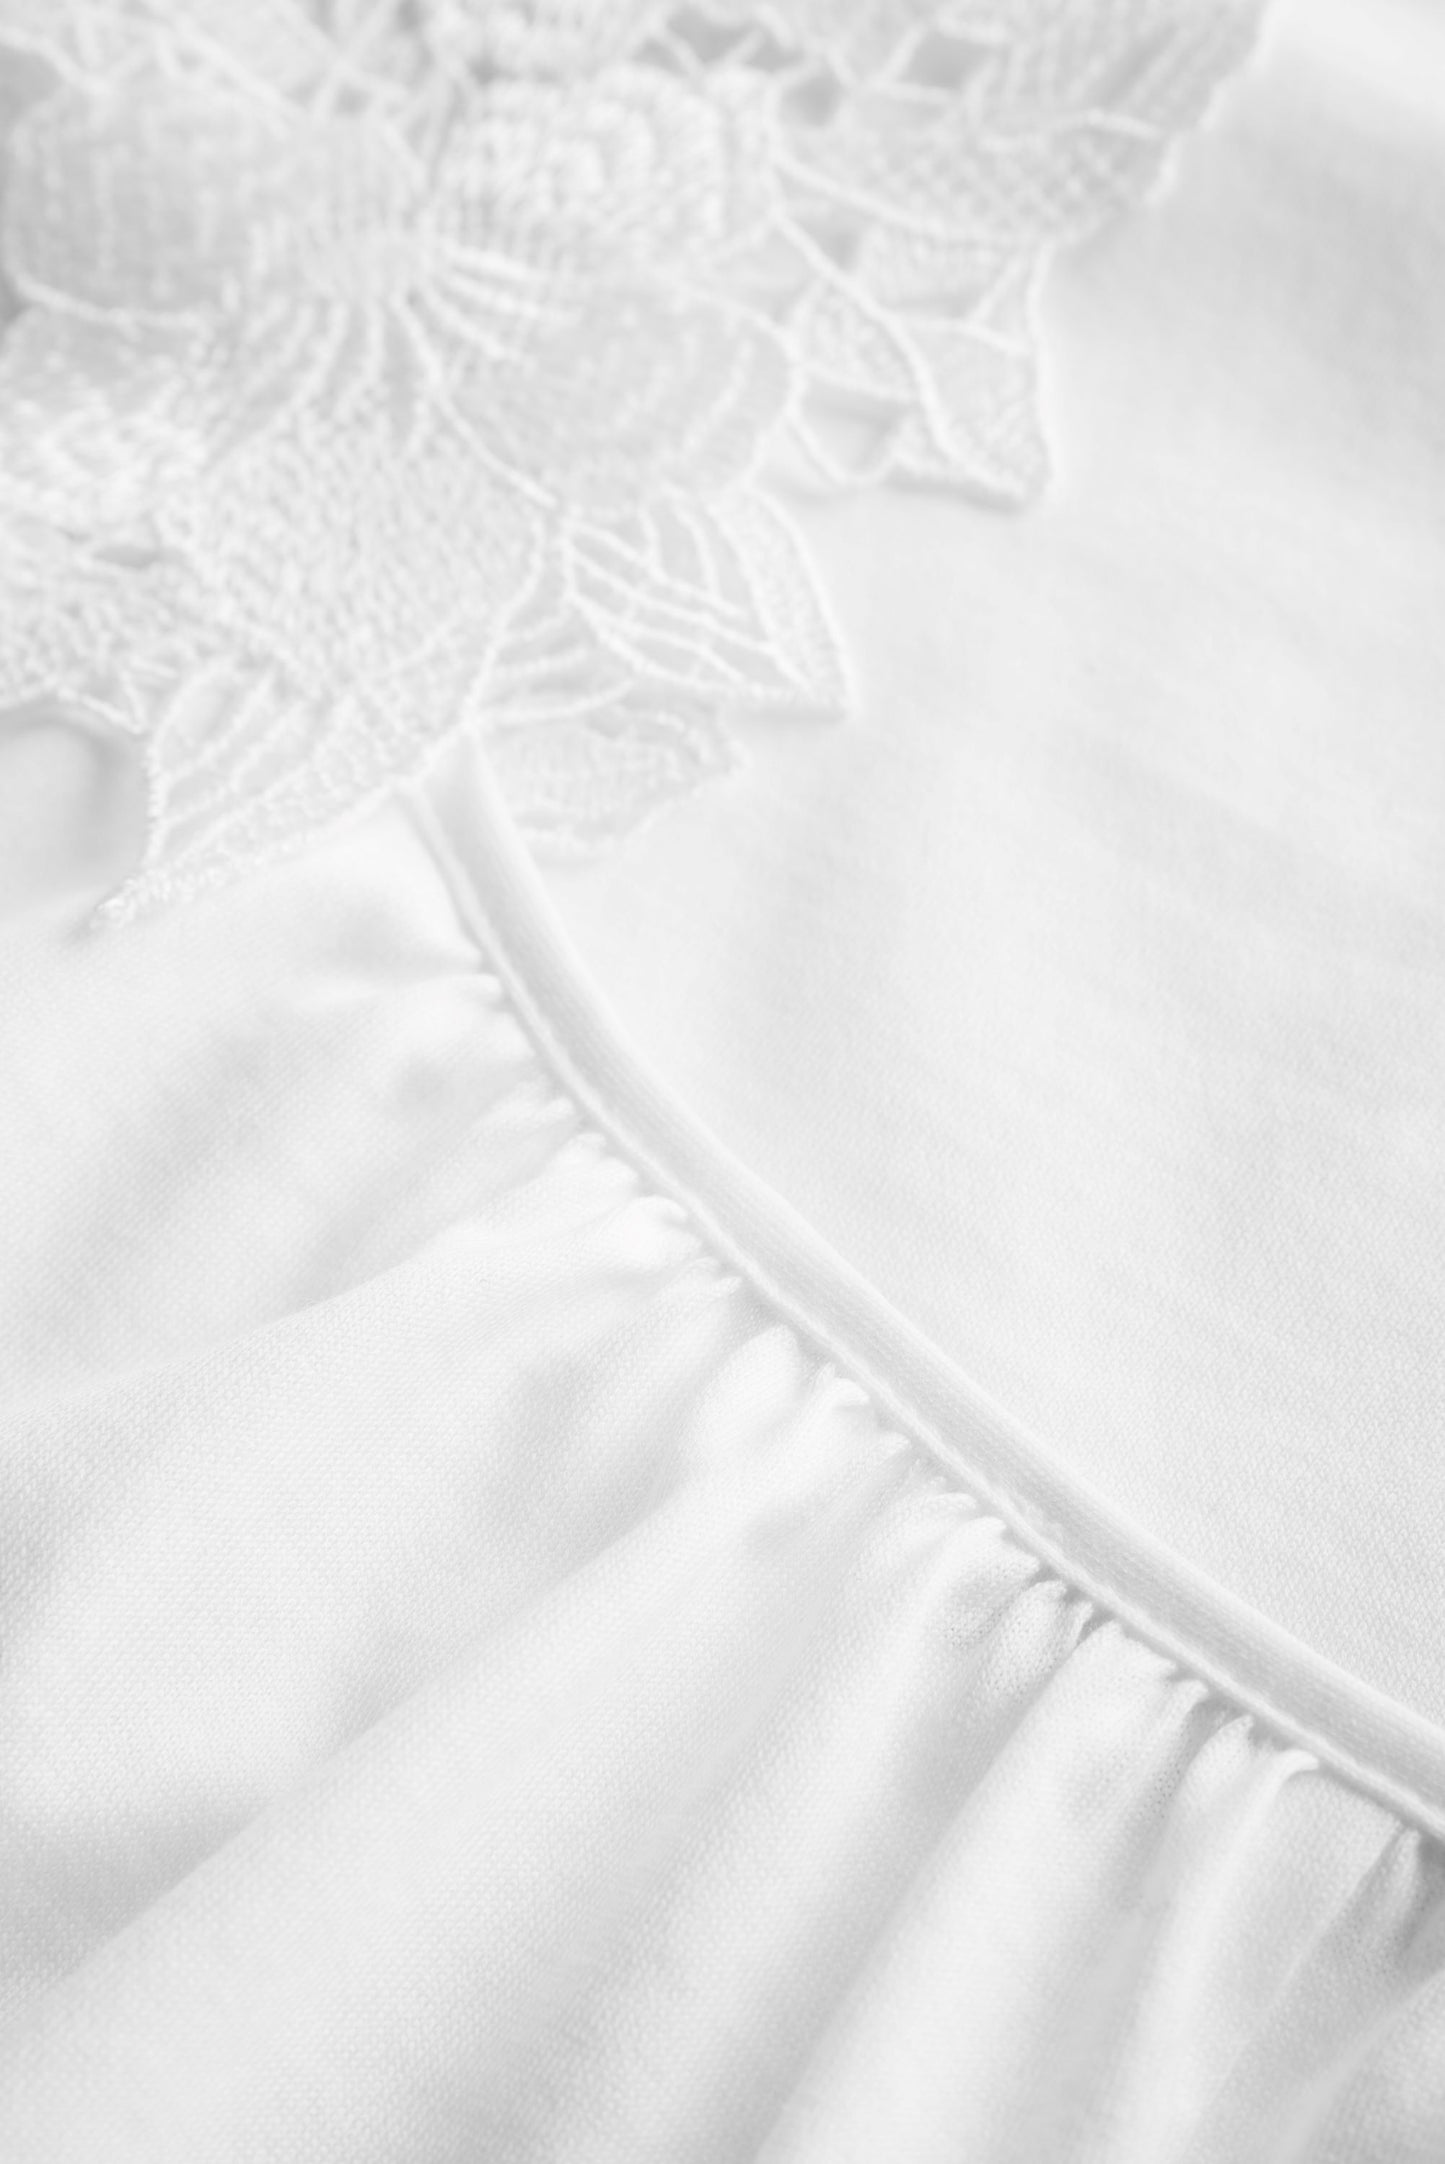 Féraud Paris' High Class line offers a single jersey cotton nightgown providing an exquisite level of softness.